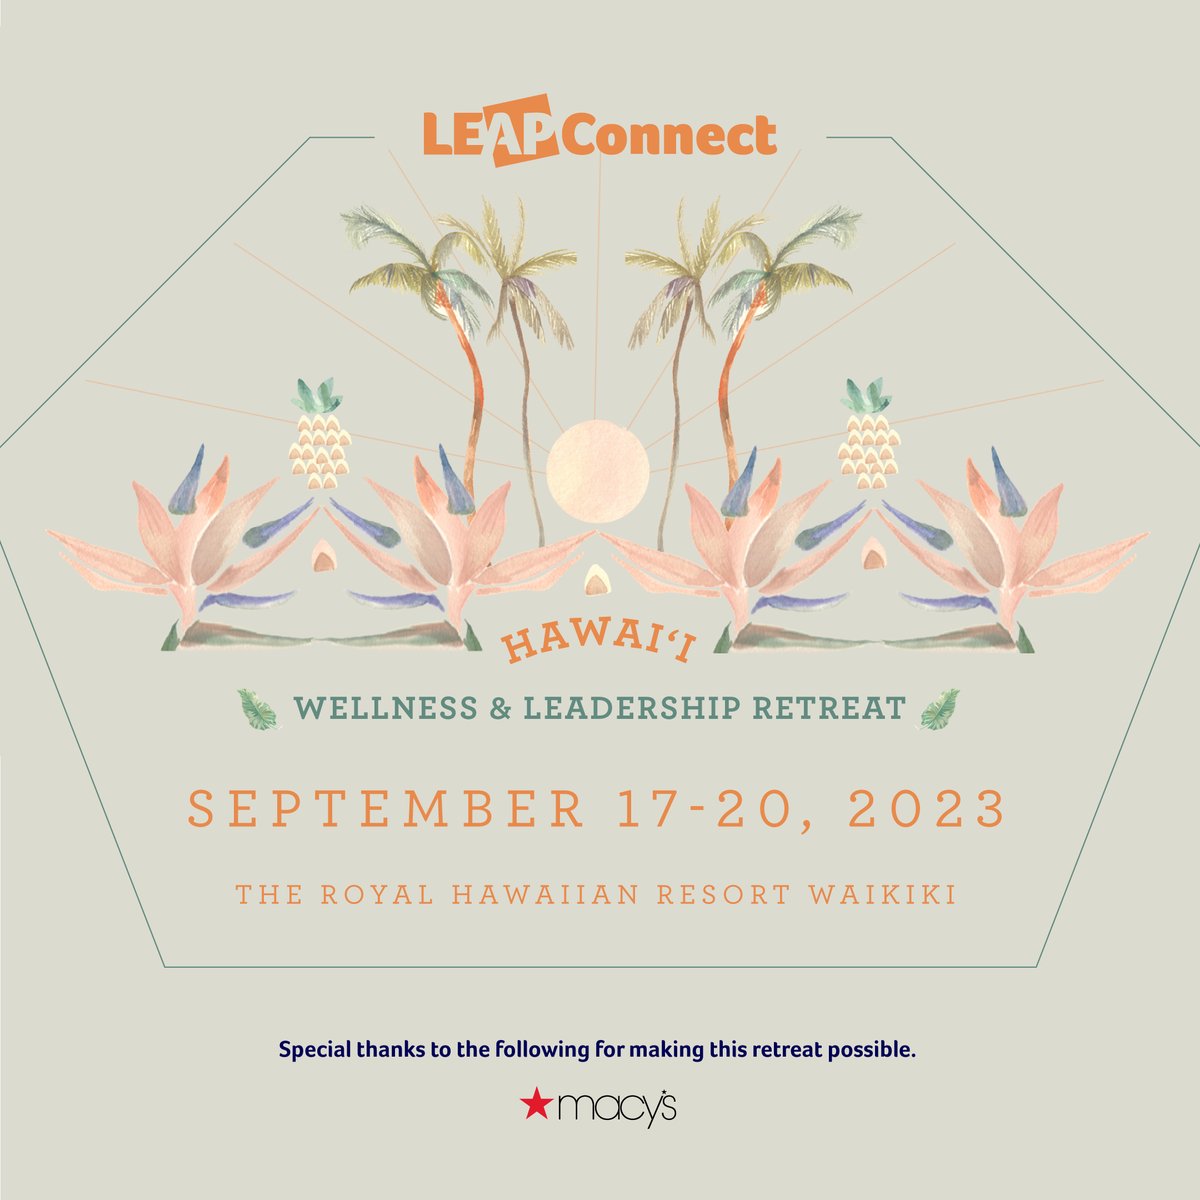 Don't wait to sign up for LEAP's Wellness and Leadership Retreat for API Women! We invite all API (Asian, Native Hawaiian and Pacific Islander) women who want to grow and heal from traumas related to racially motivated injustices. More info here leap.org/retreat2023